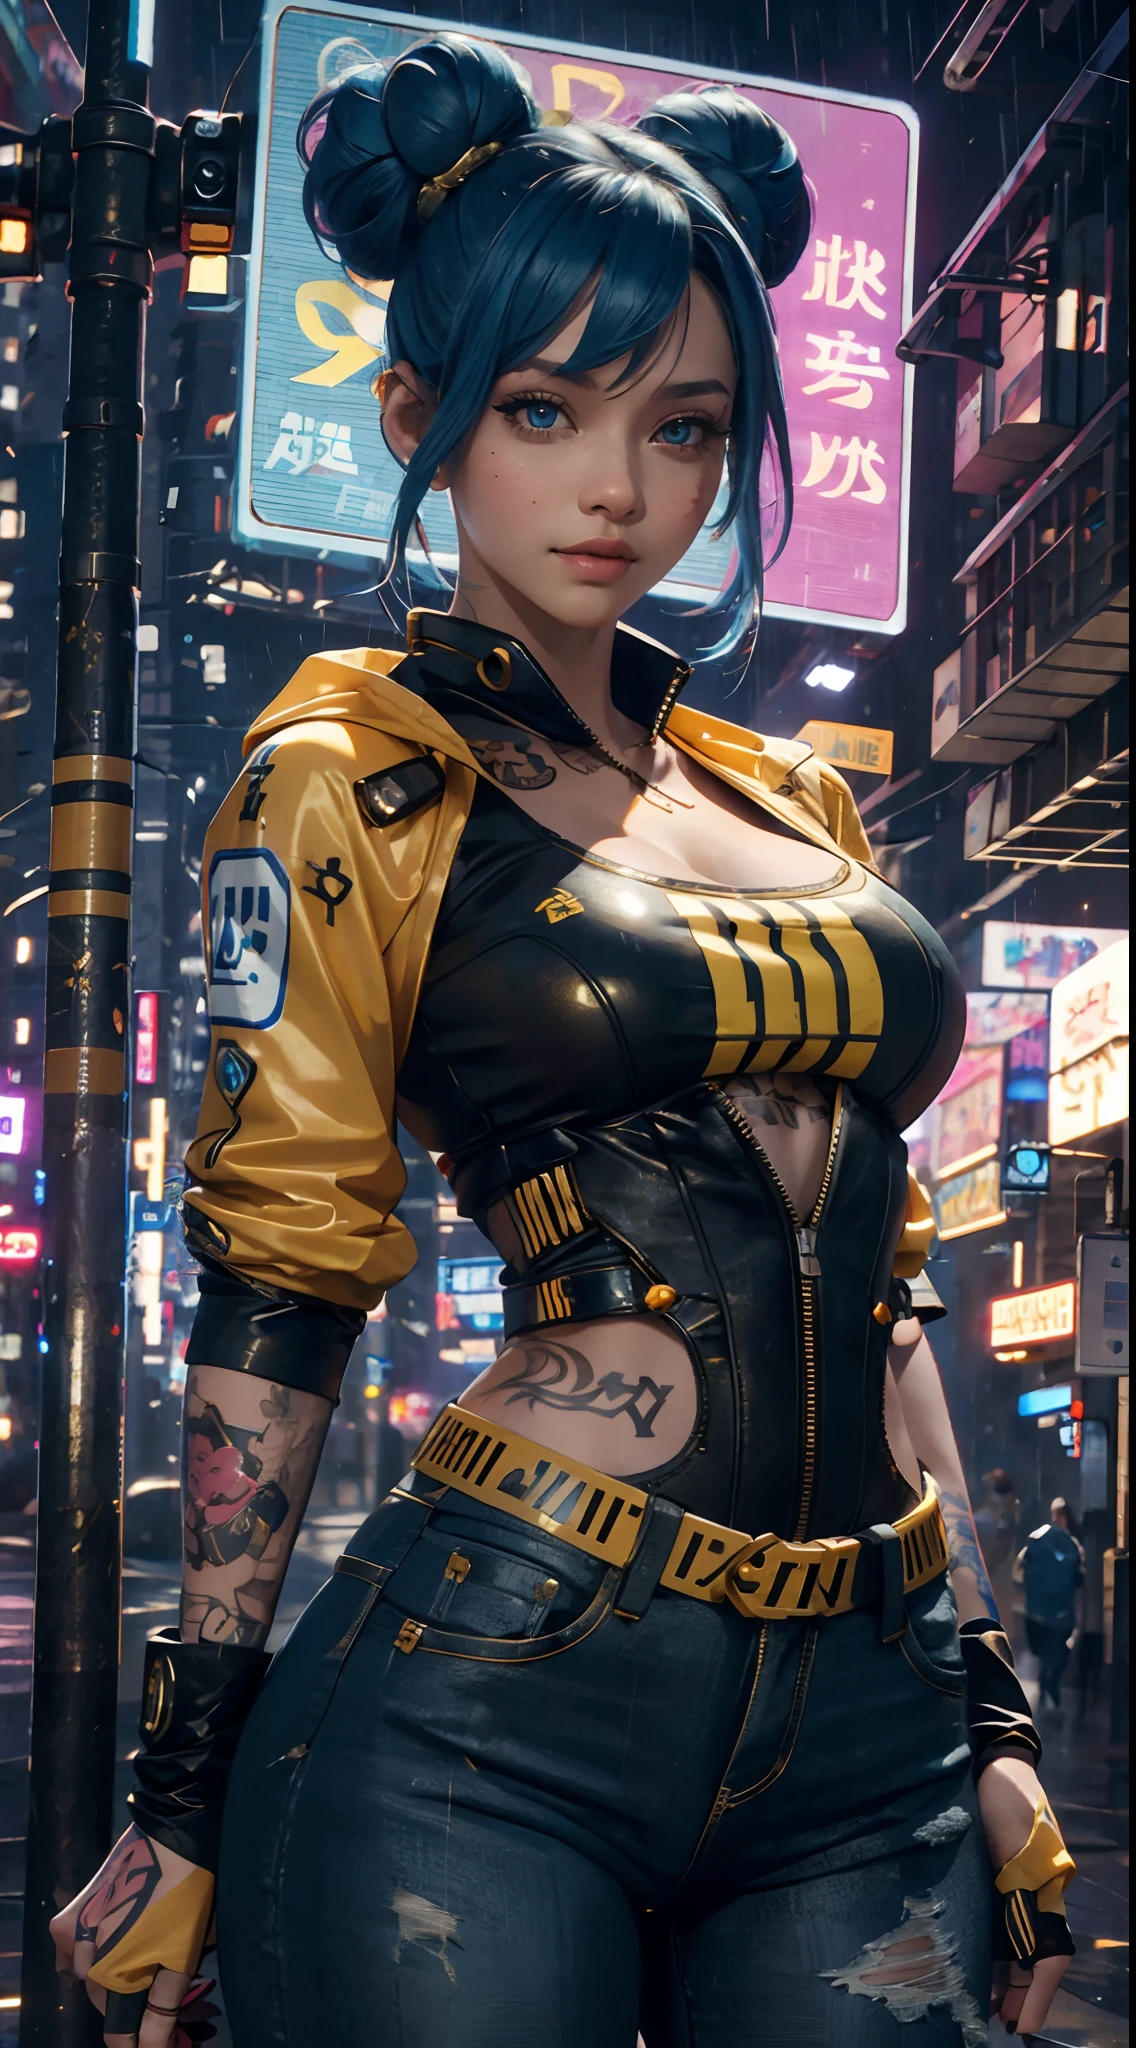 masterpiece, maximum quality, ultra high resolution, 8k, a girl,beauty,21years old,fair skin, extremely beautiful,strong gaze, alone,bust portrait,cyberpunk outfit, extremely detailed face, detailed eyes, mischievous smile, cheerful, realistic photo, totally realistic, human pelle, studio lighting,golden ratio body, wide hips,perfect legs, big ass,blue hair, double buns,blunt bangs,orange and white clothing,D-cup breasts,in the cyberpunk city,cyberpunk city background,((night)),rain,side pose,tattoos